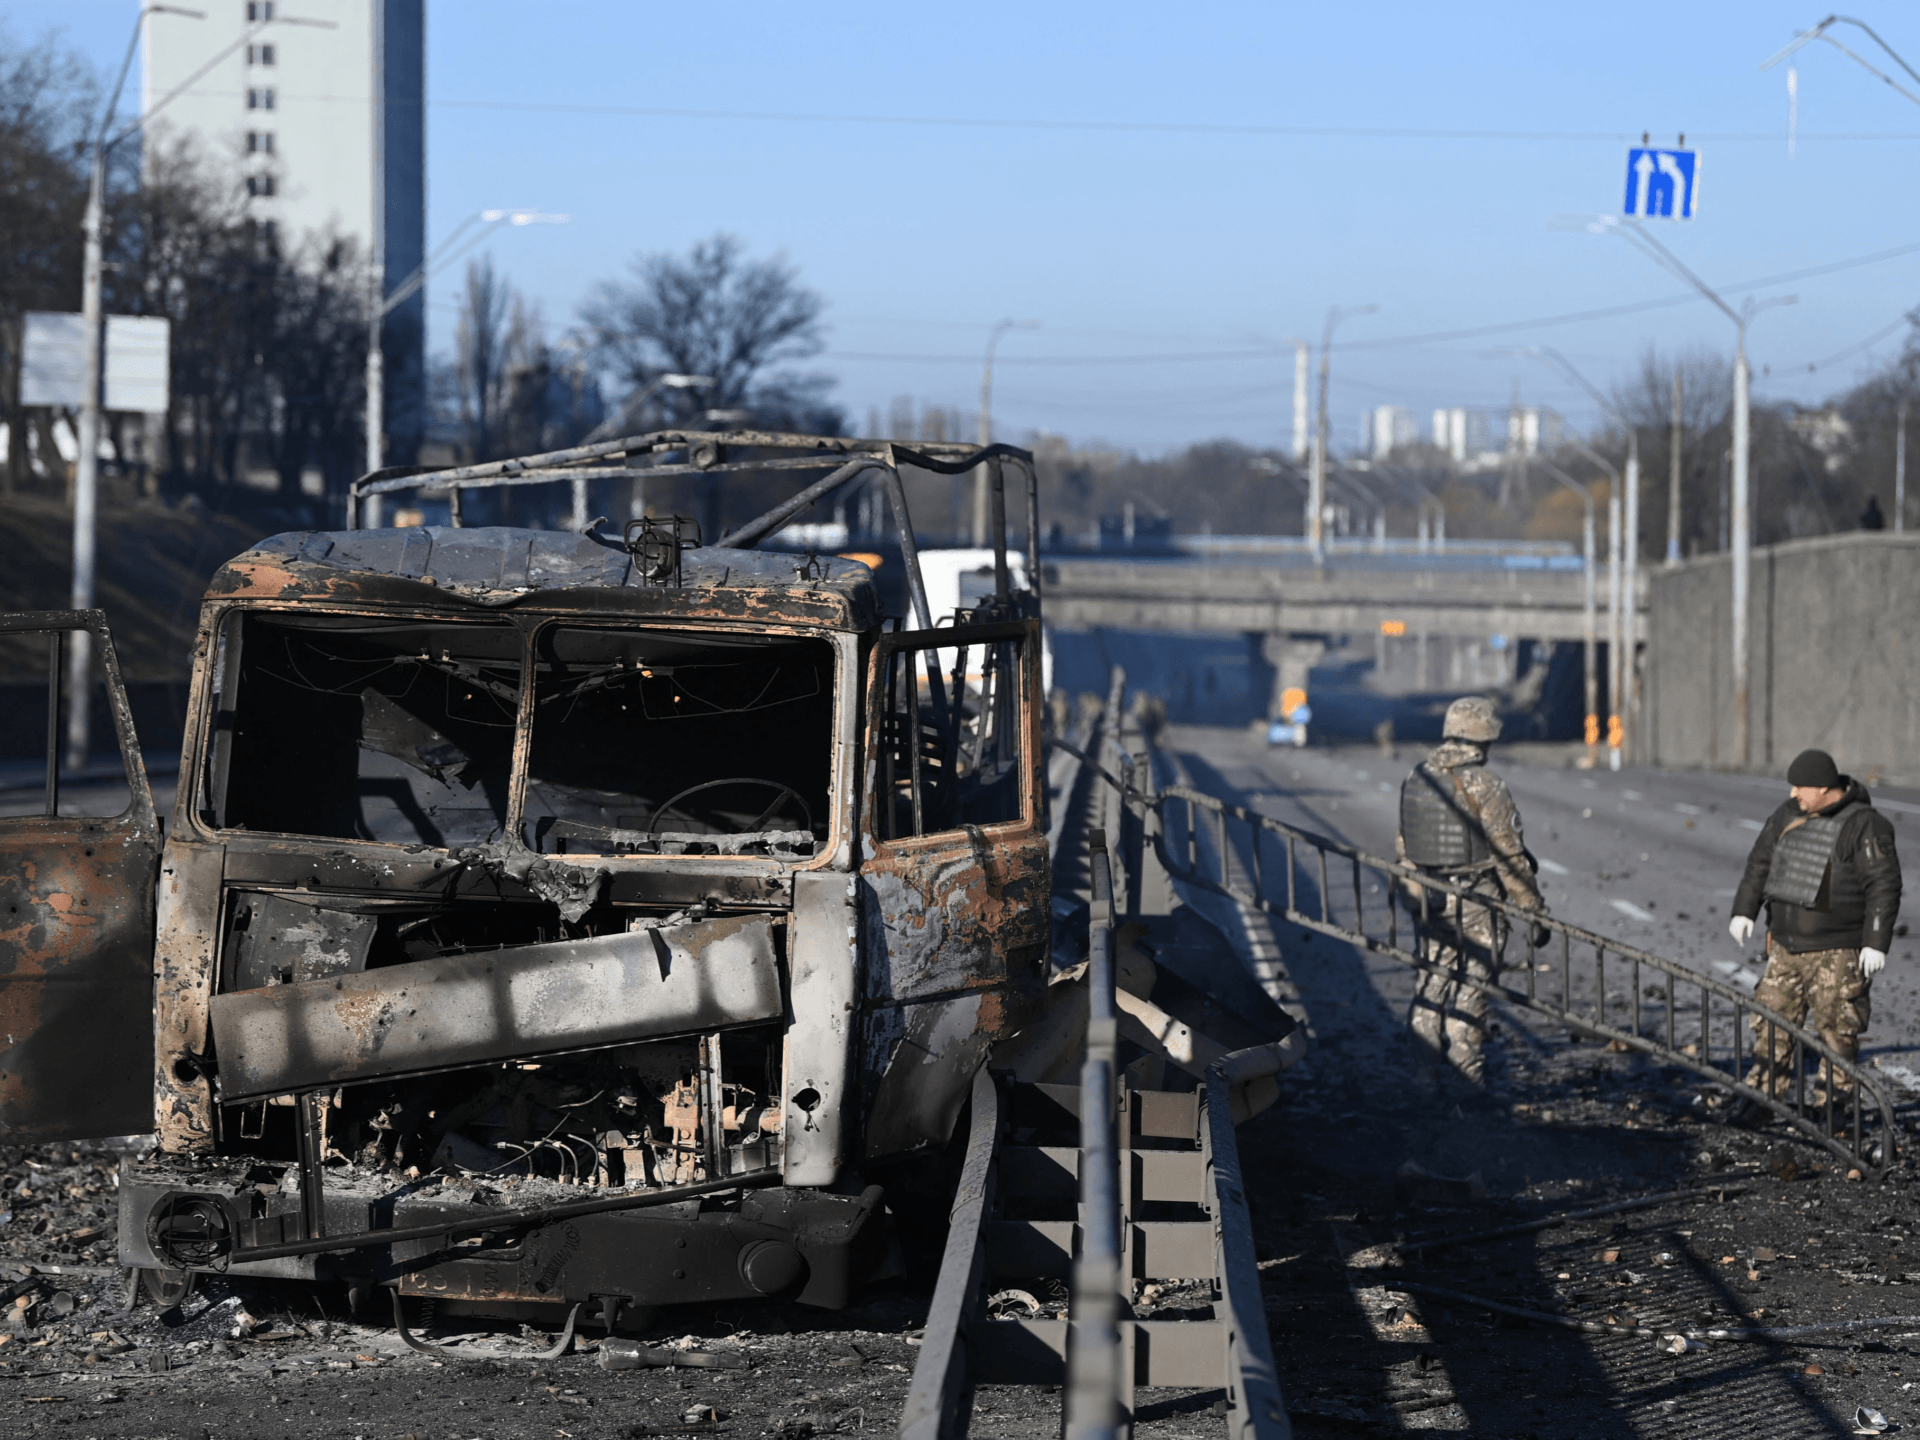 TOPSHOT - Ukrainian soldiers stand past a burnt Ukrainian army vehicle on the west side of the Ukrainian capital of Kyiv on February 26, 2022. - Ukrainian soldiers beat back a Russian attack in the capital Kyiv only hours after President Volodymyr Zelensky warns Moscow would attempt to take the city before dawn. (Photo by Daniel LEAL / AFP) (Photo by DANIEL LEAL/AFP via Getty Images)